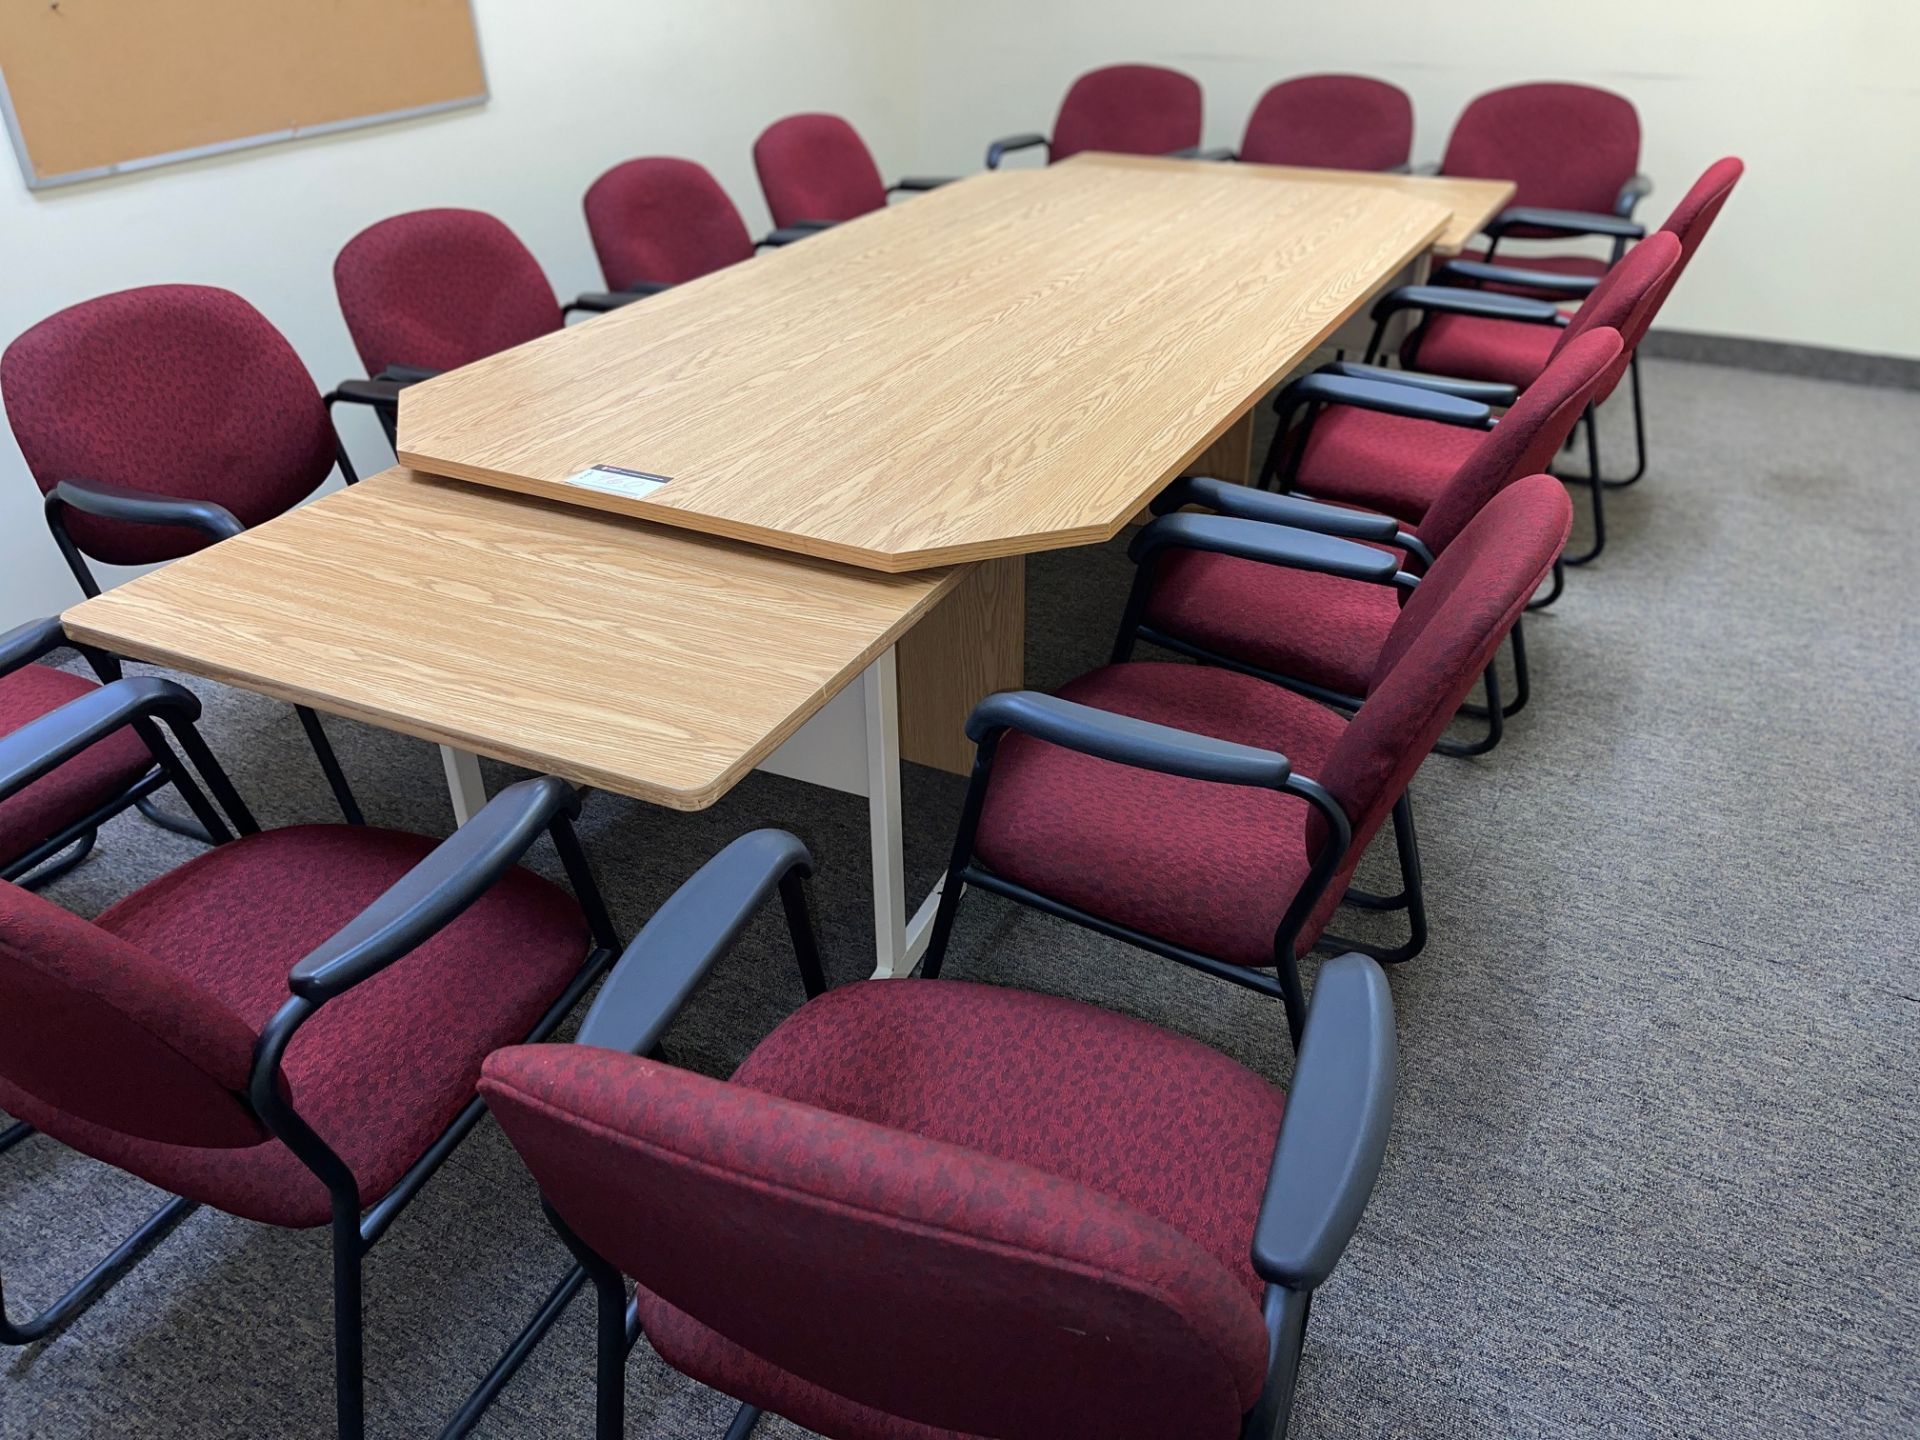 LOT/ 8' LONG TABLE WITH (2) END DESKS, (14) RED SLED BASE ARM CHAIRS, (3) WALL BOARDS - Image 2 of 4